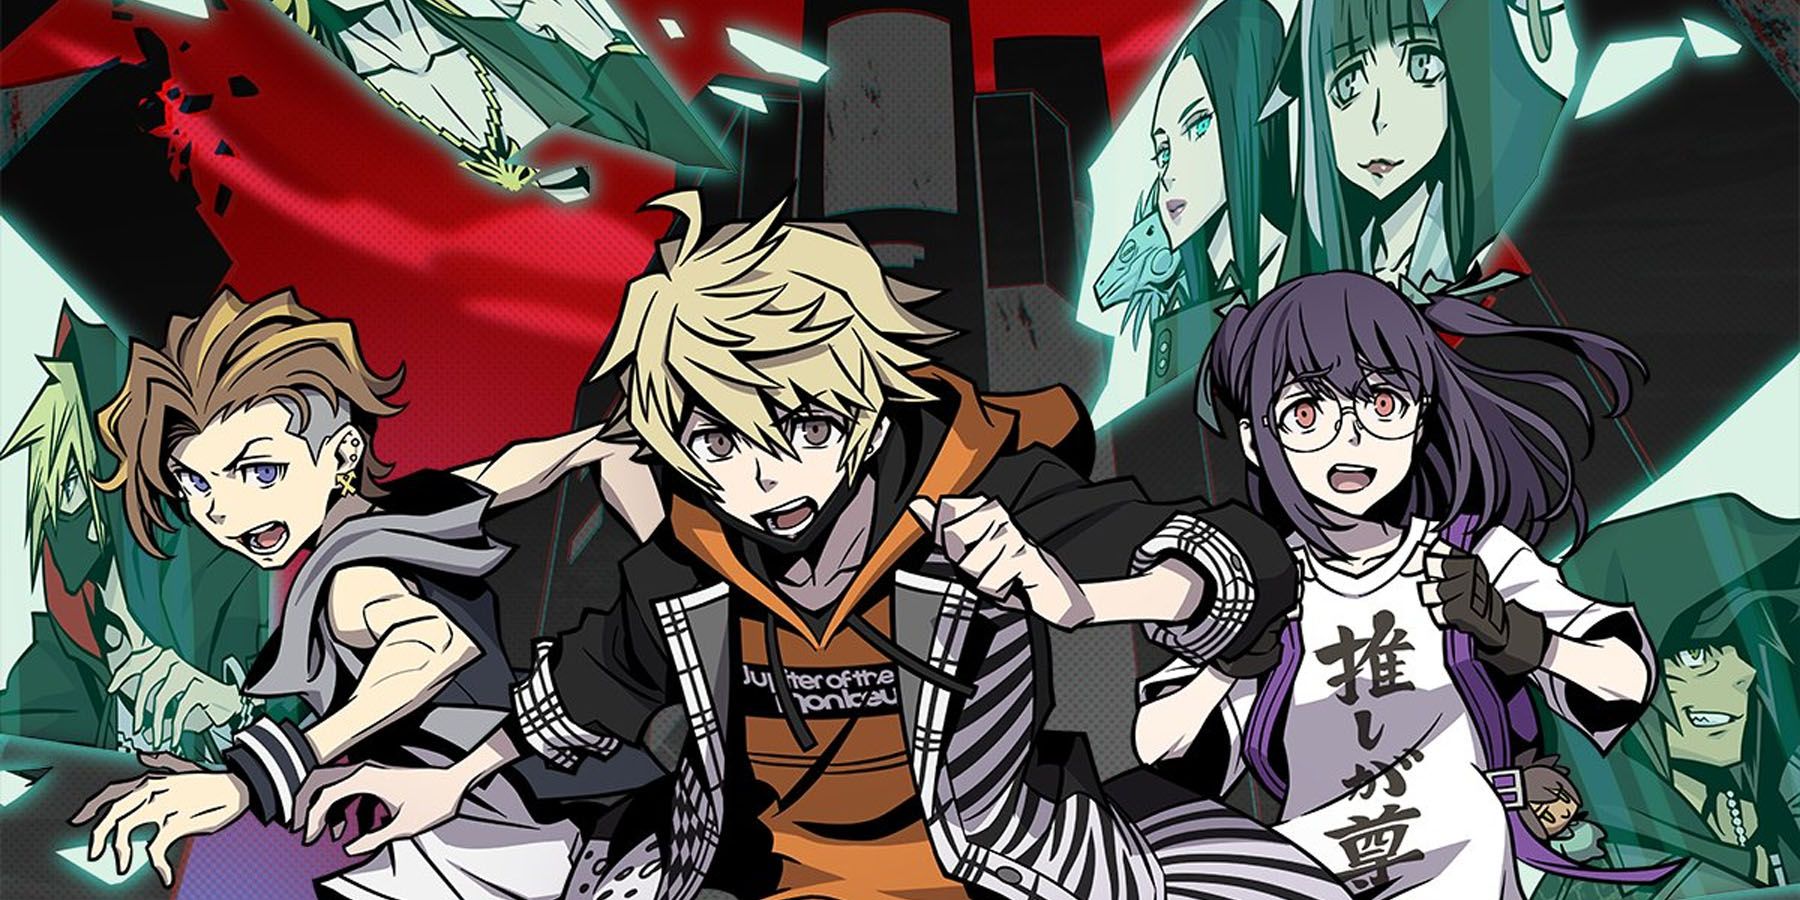 Square Enix says Neo: The World Ends with You 'underperformed